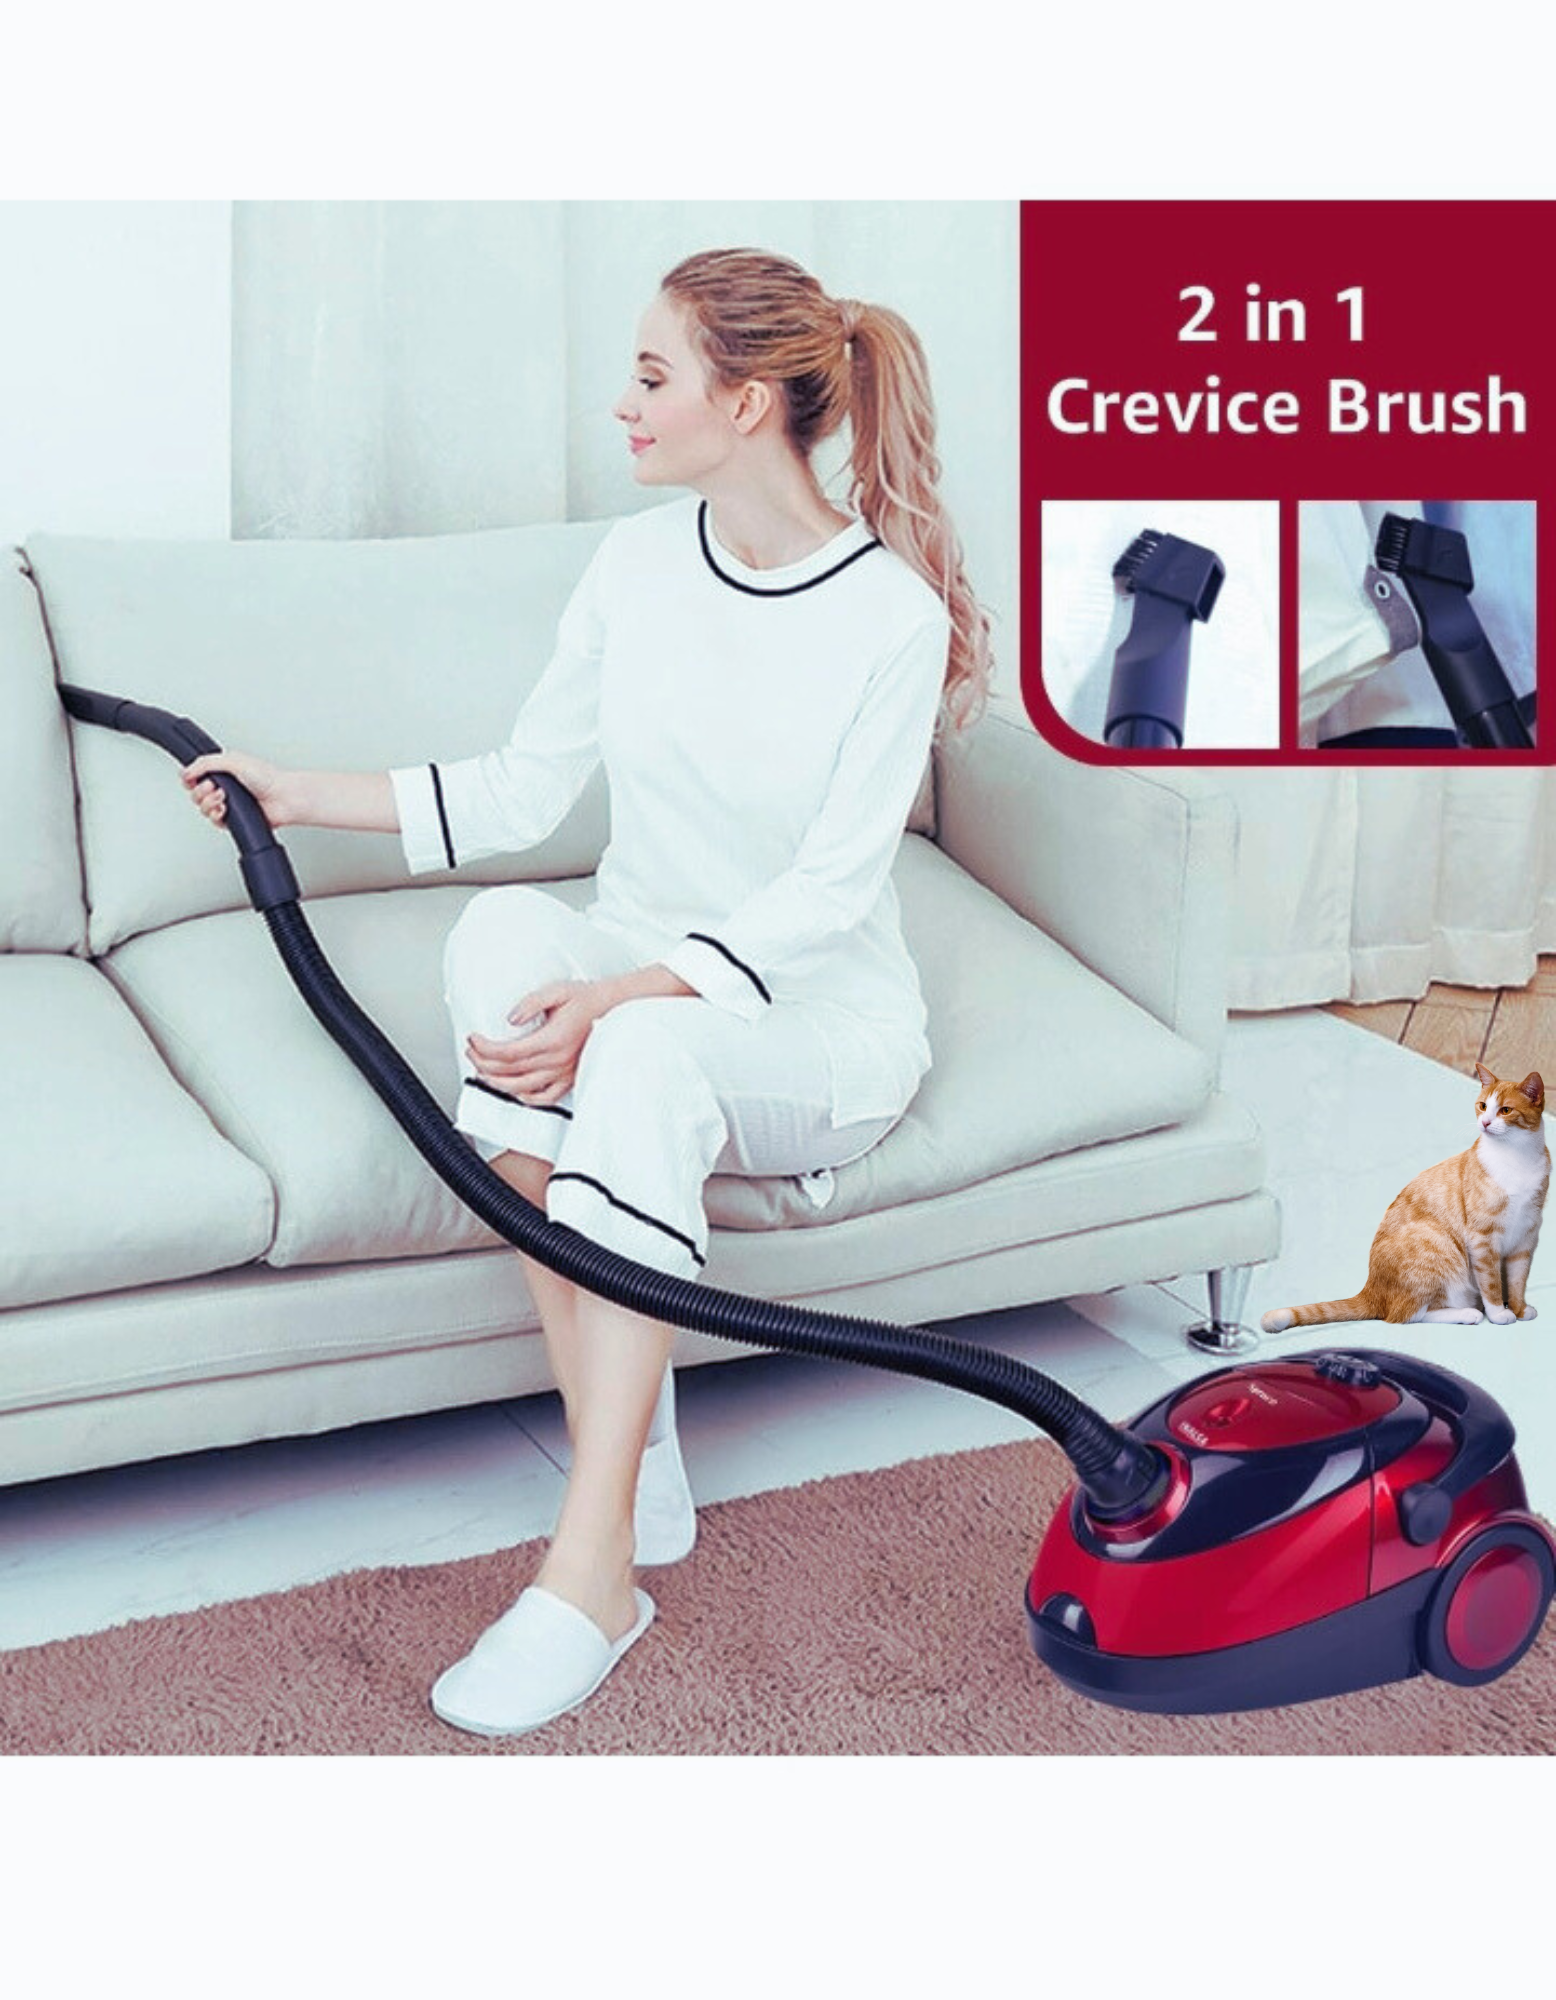 Vaccum cleaner for home